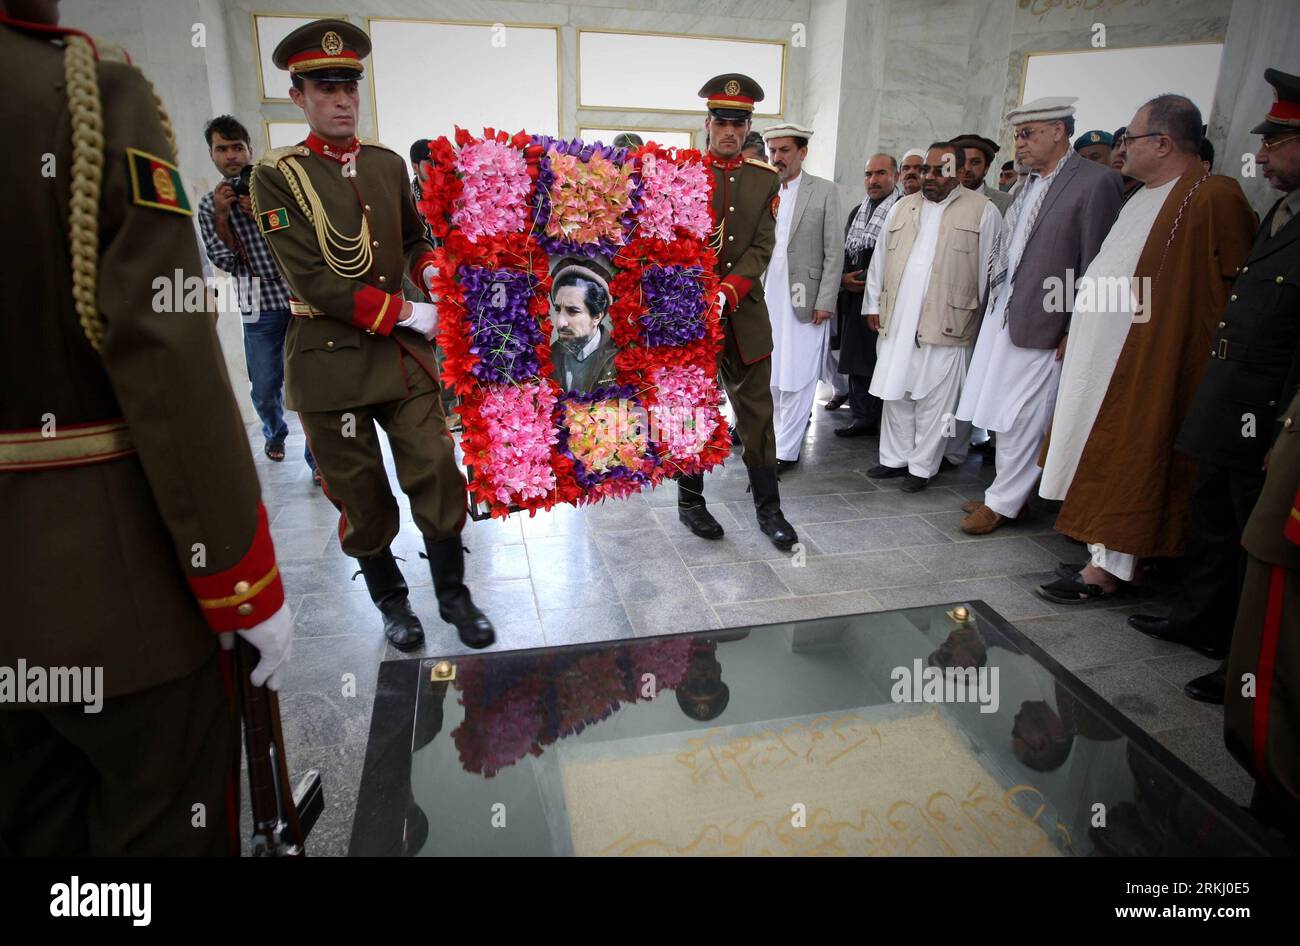 Bildnummer: 55935378  Datum: 10.09.2011  Copyright: imago/Xinhua (110910) -- PANJSHIR, Sept. 10, 2011 (Xinhua) -- Afghan honor guards carry a wreath during the ceremony marking the 10th anniversary of the death of Ahmad Shah Massoud in Panjshir Province, Afghanistan, Sept. 10, 2011. Anti-Taliban leader and commander of Northern Alliance Ahmad Shah Massoud was assassinated in a suicide attack by some Arabs pretending to be journalists on September 9, 2001, and two days later the September 11 attacks on the United States happened. (Xinhua/Ahmad Massoud)(wjd) AFGHANISTAN-AHMAD SHAH MASSOUD-DEATH- Stock Photo